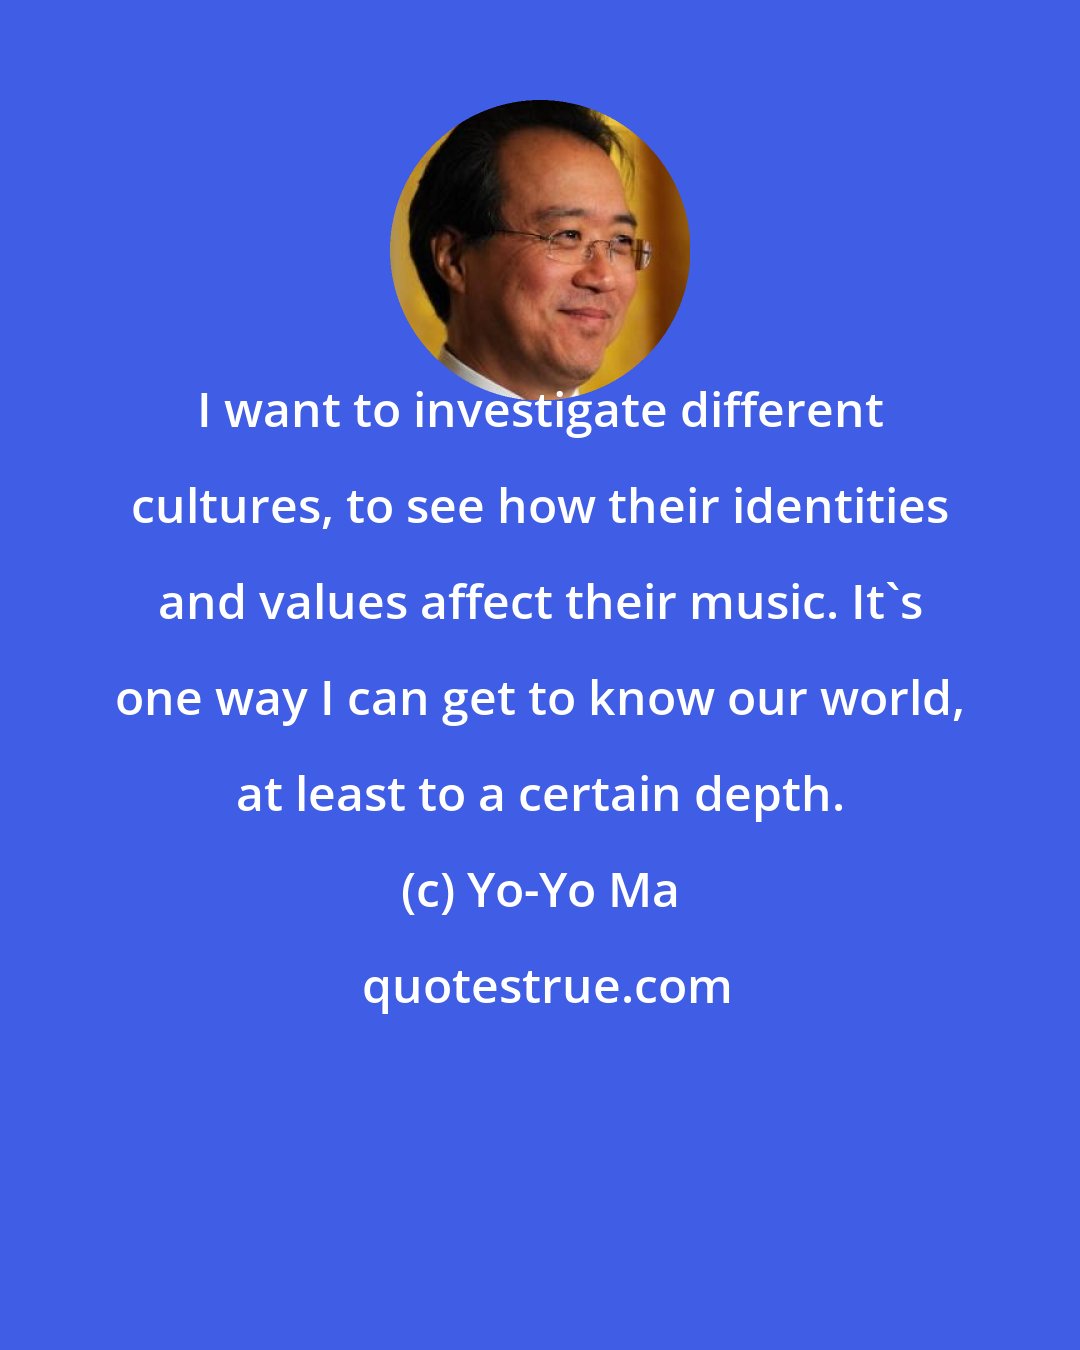 Yo-Yo Ma: I want to investigate different cultures, to see how their identities and values affect their music. It's one way I can get to know our world, at least to a certain depth.